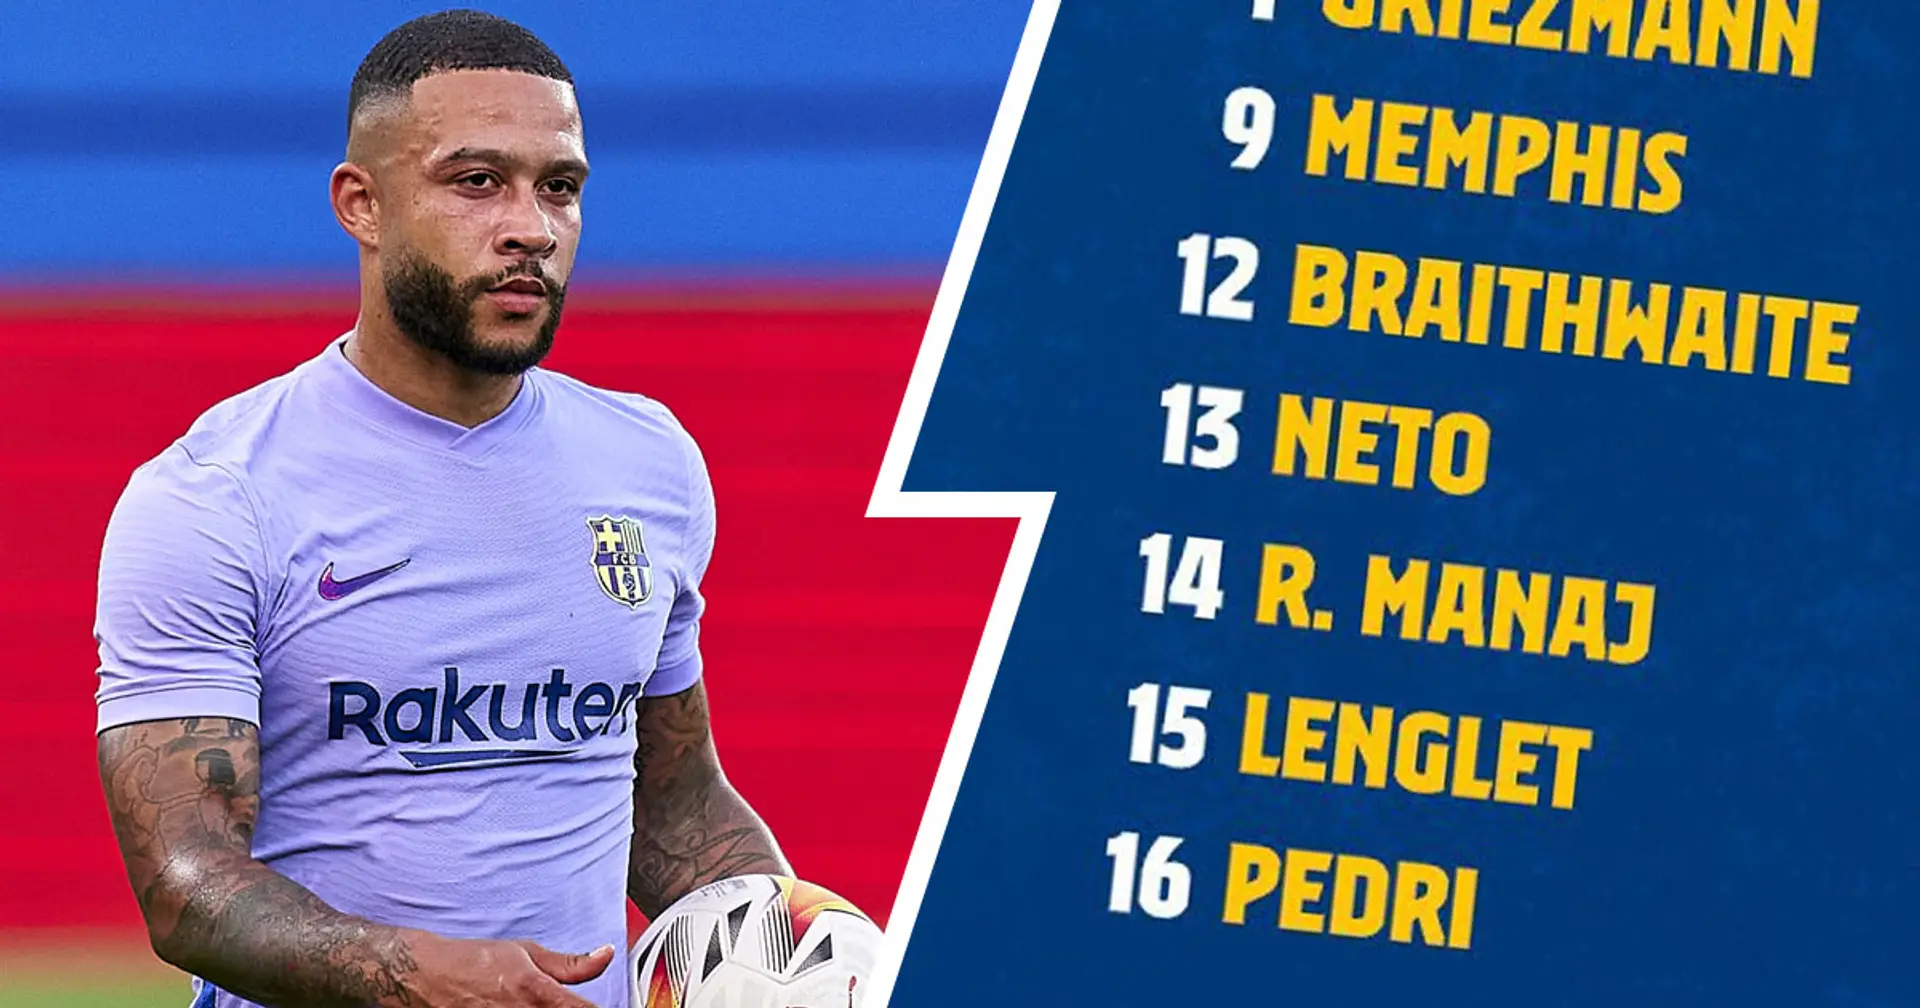 Depay and Garcia in but no Pjanic: Barca announce 23-man squad for Real Sociedad duel